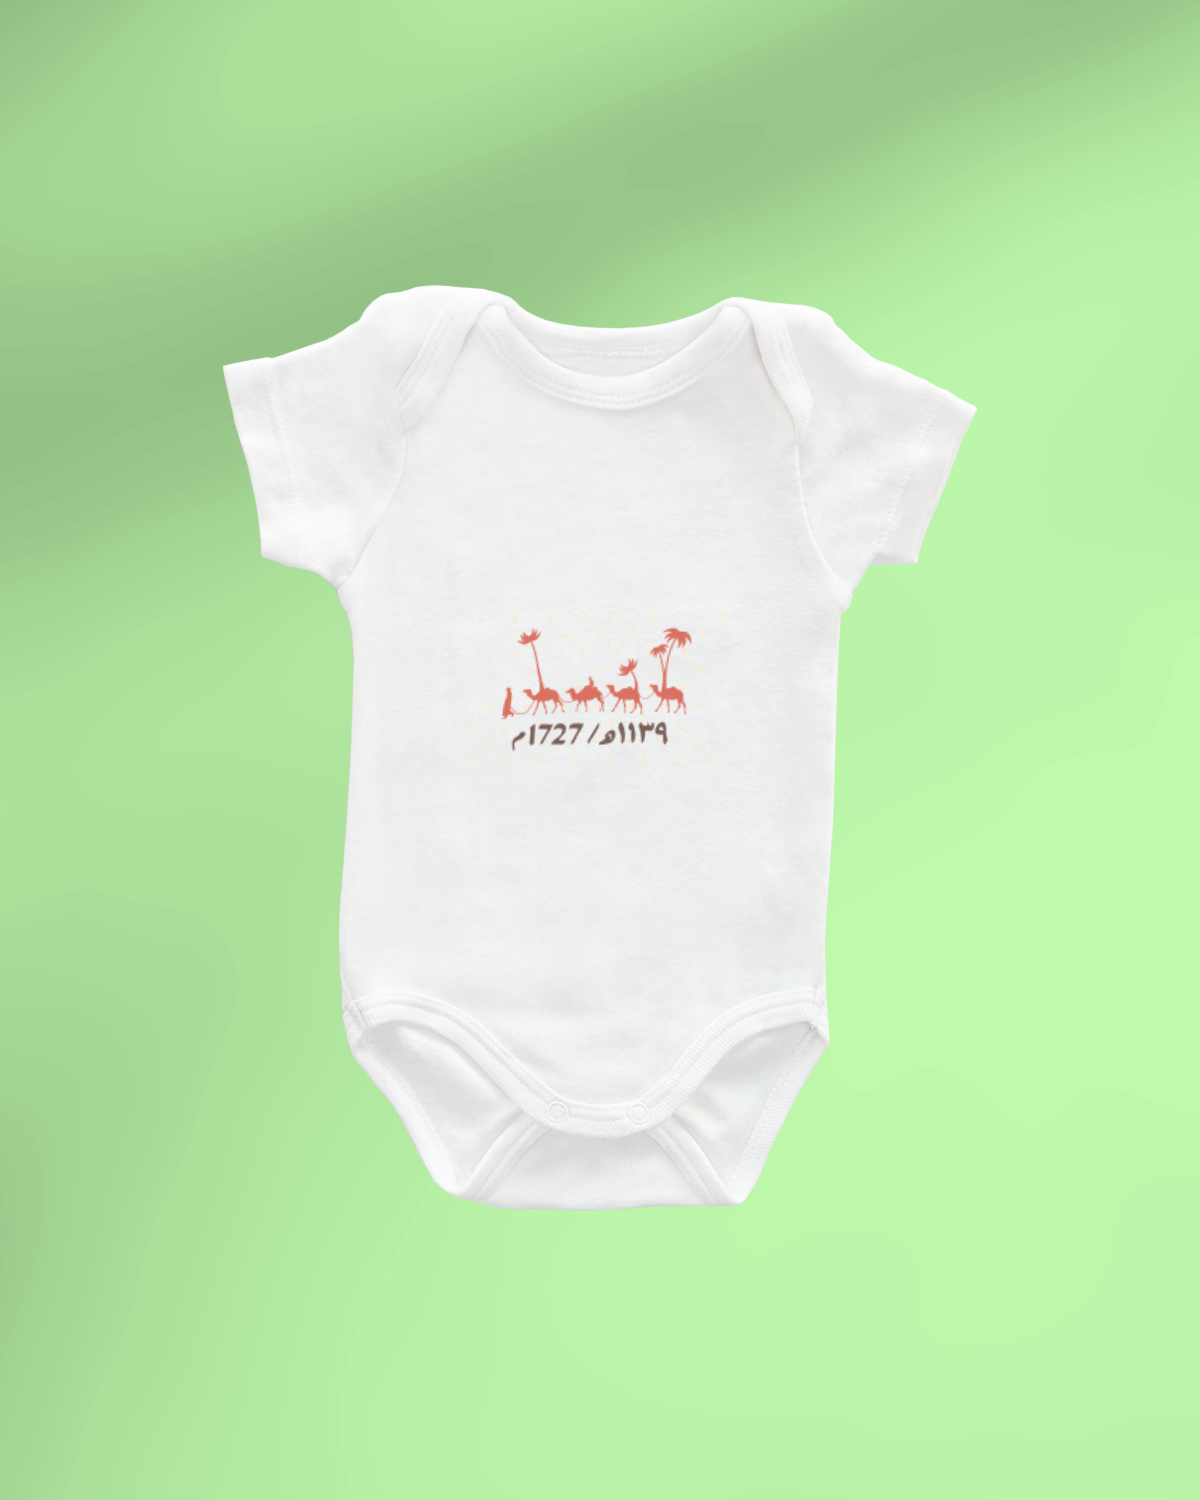 Foundation Day Baby Romper (1139 AH/1727 AD)